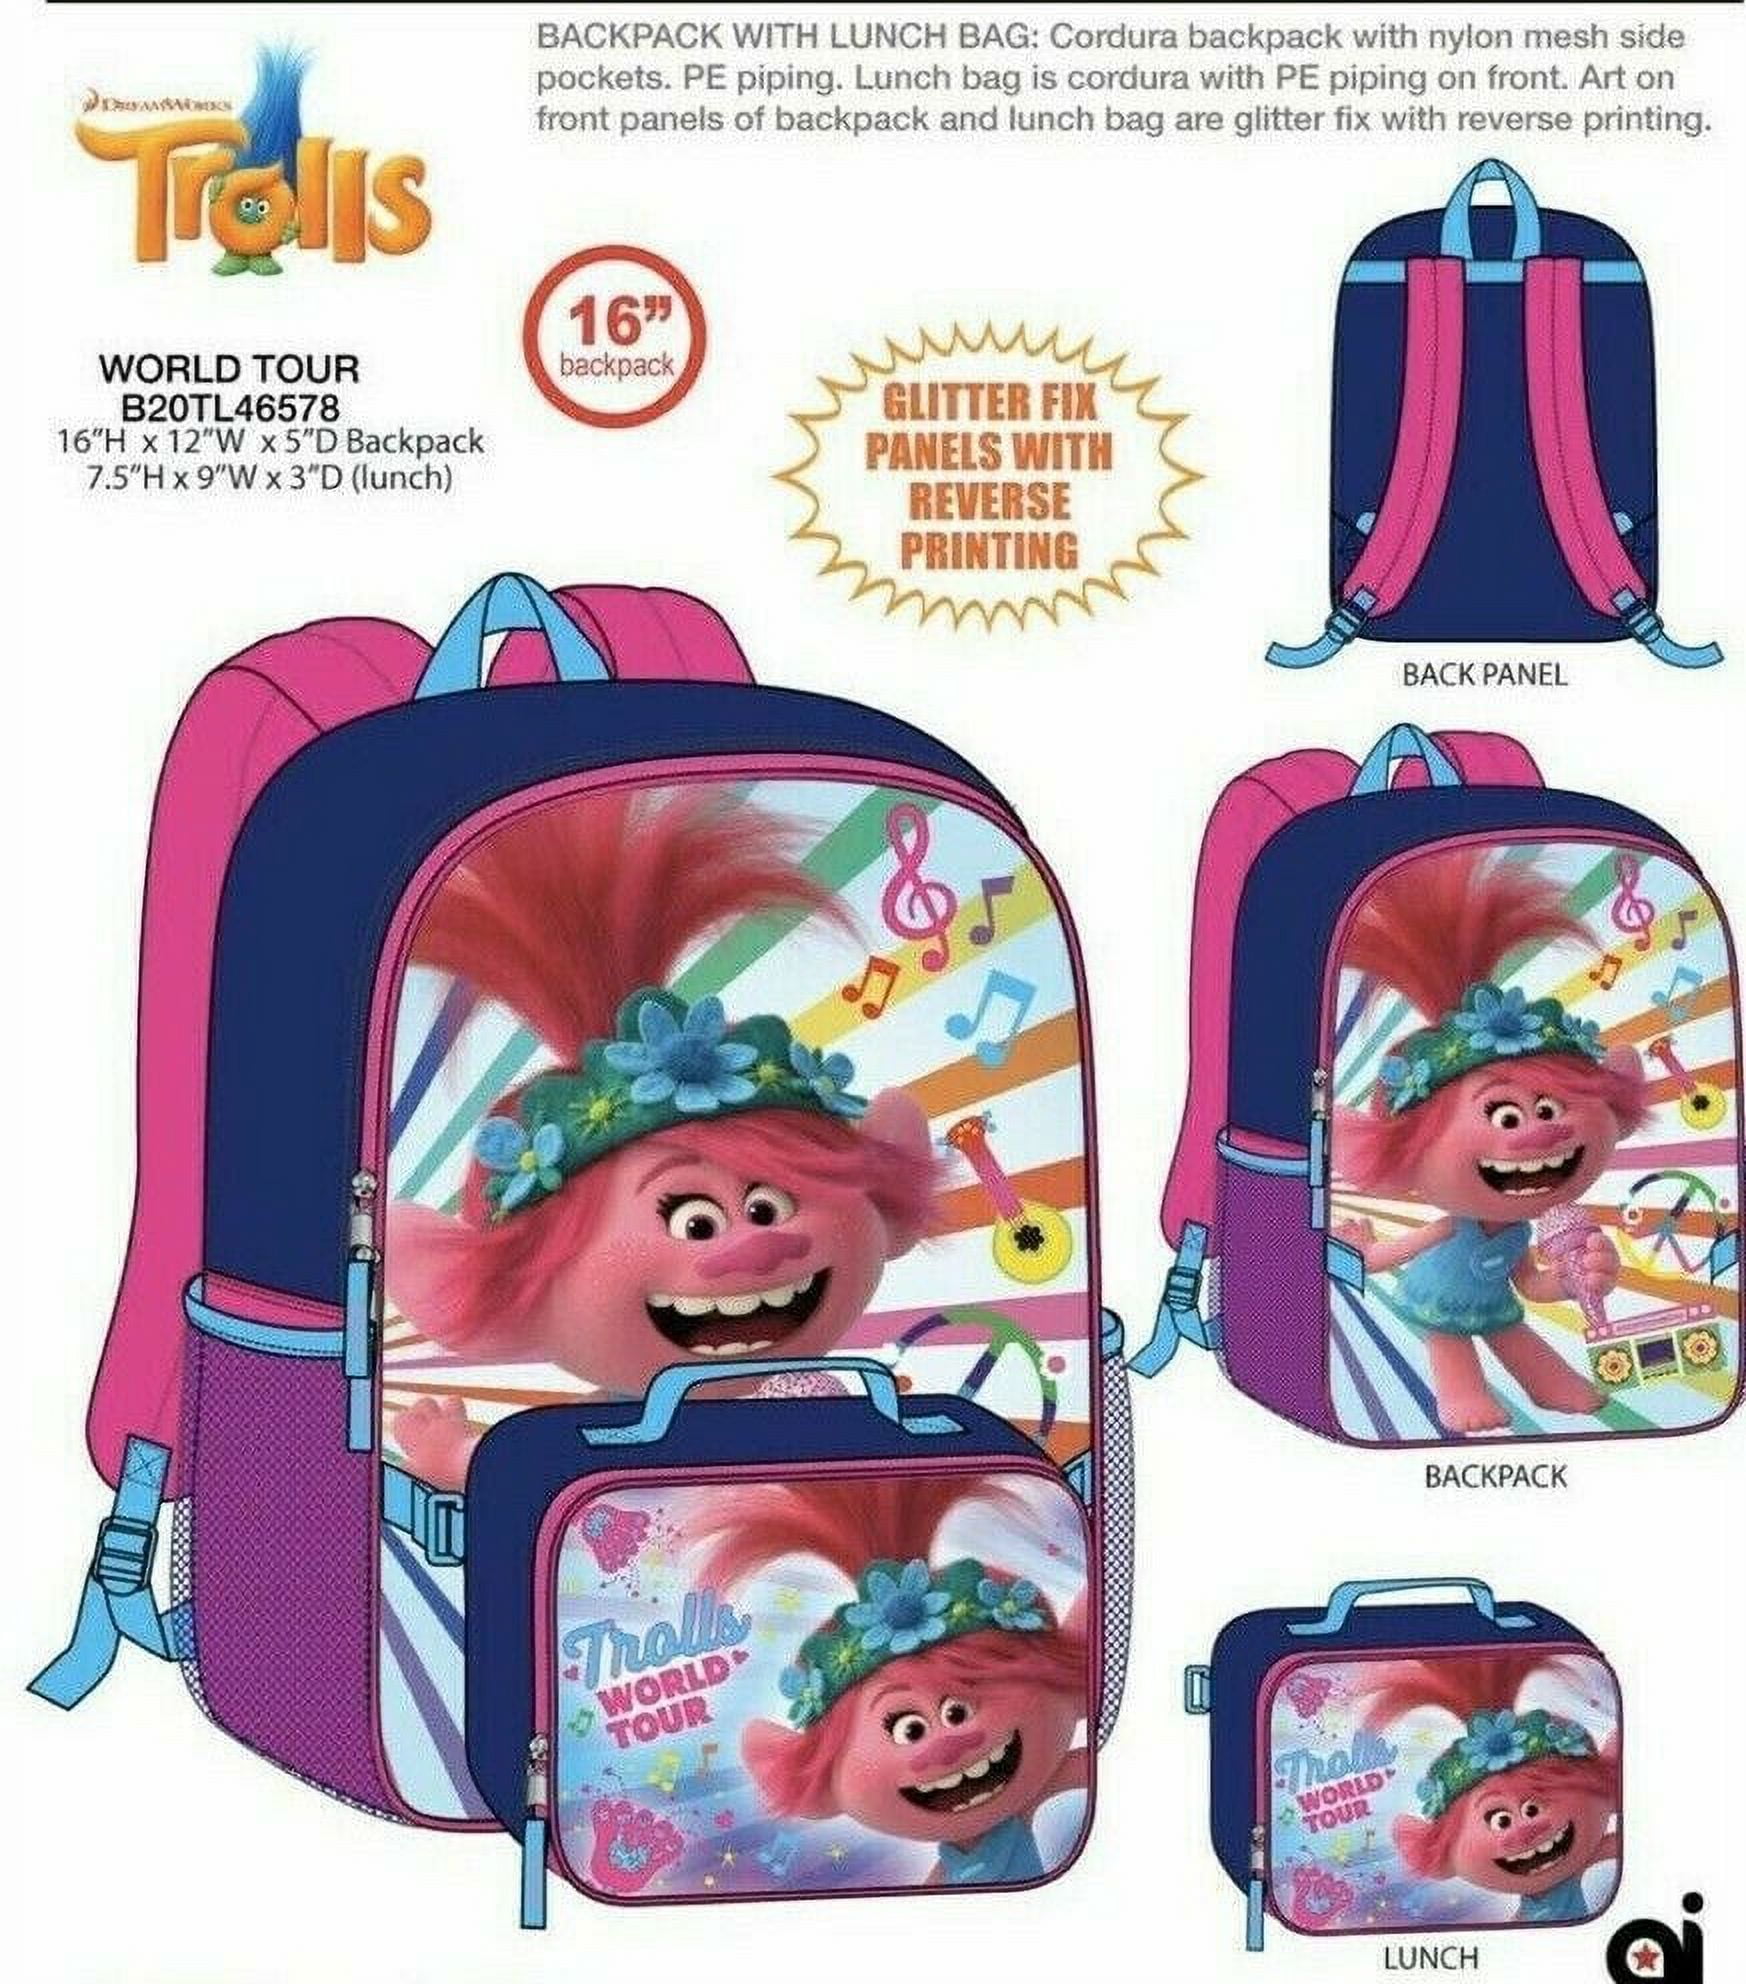 TROLLS Backpack and Lunch Box NeW Sparkly Book Bag With Lunchbox POPPY NWT